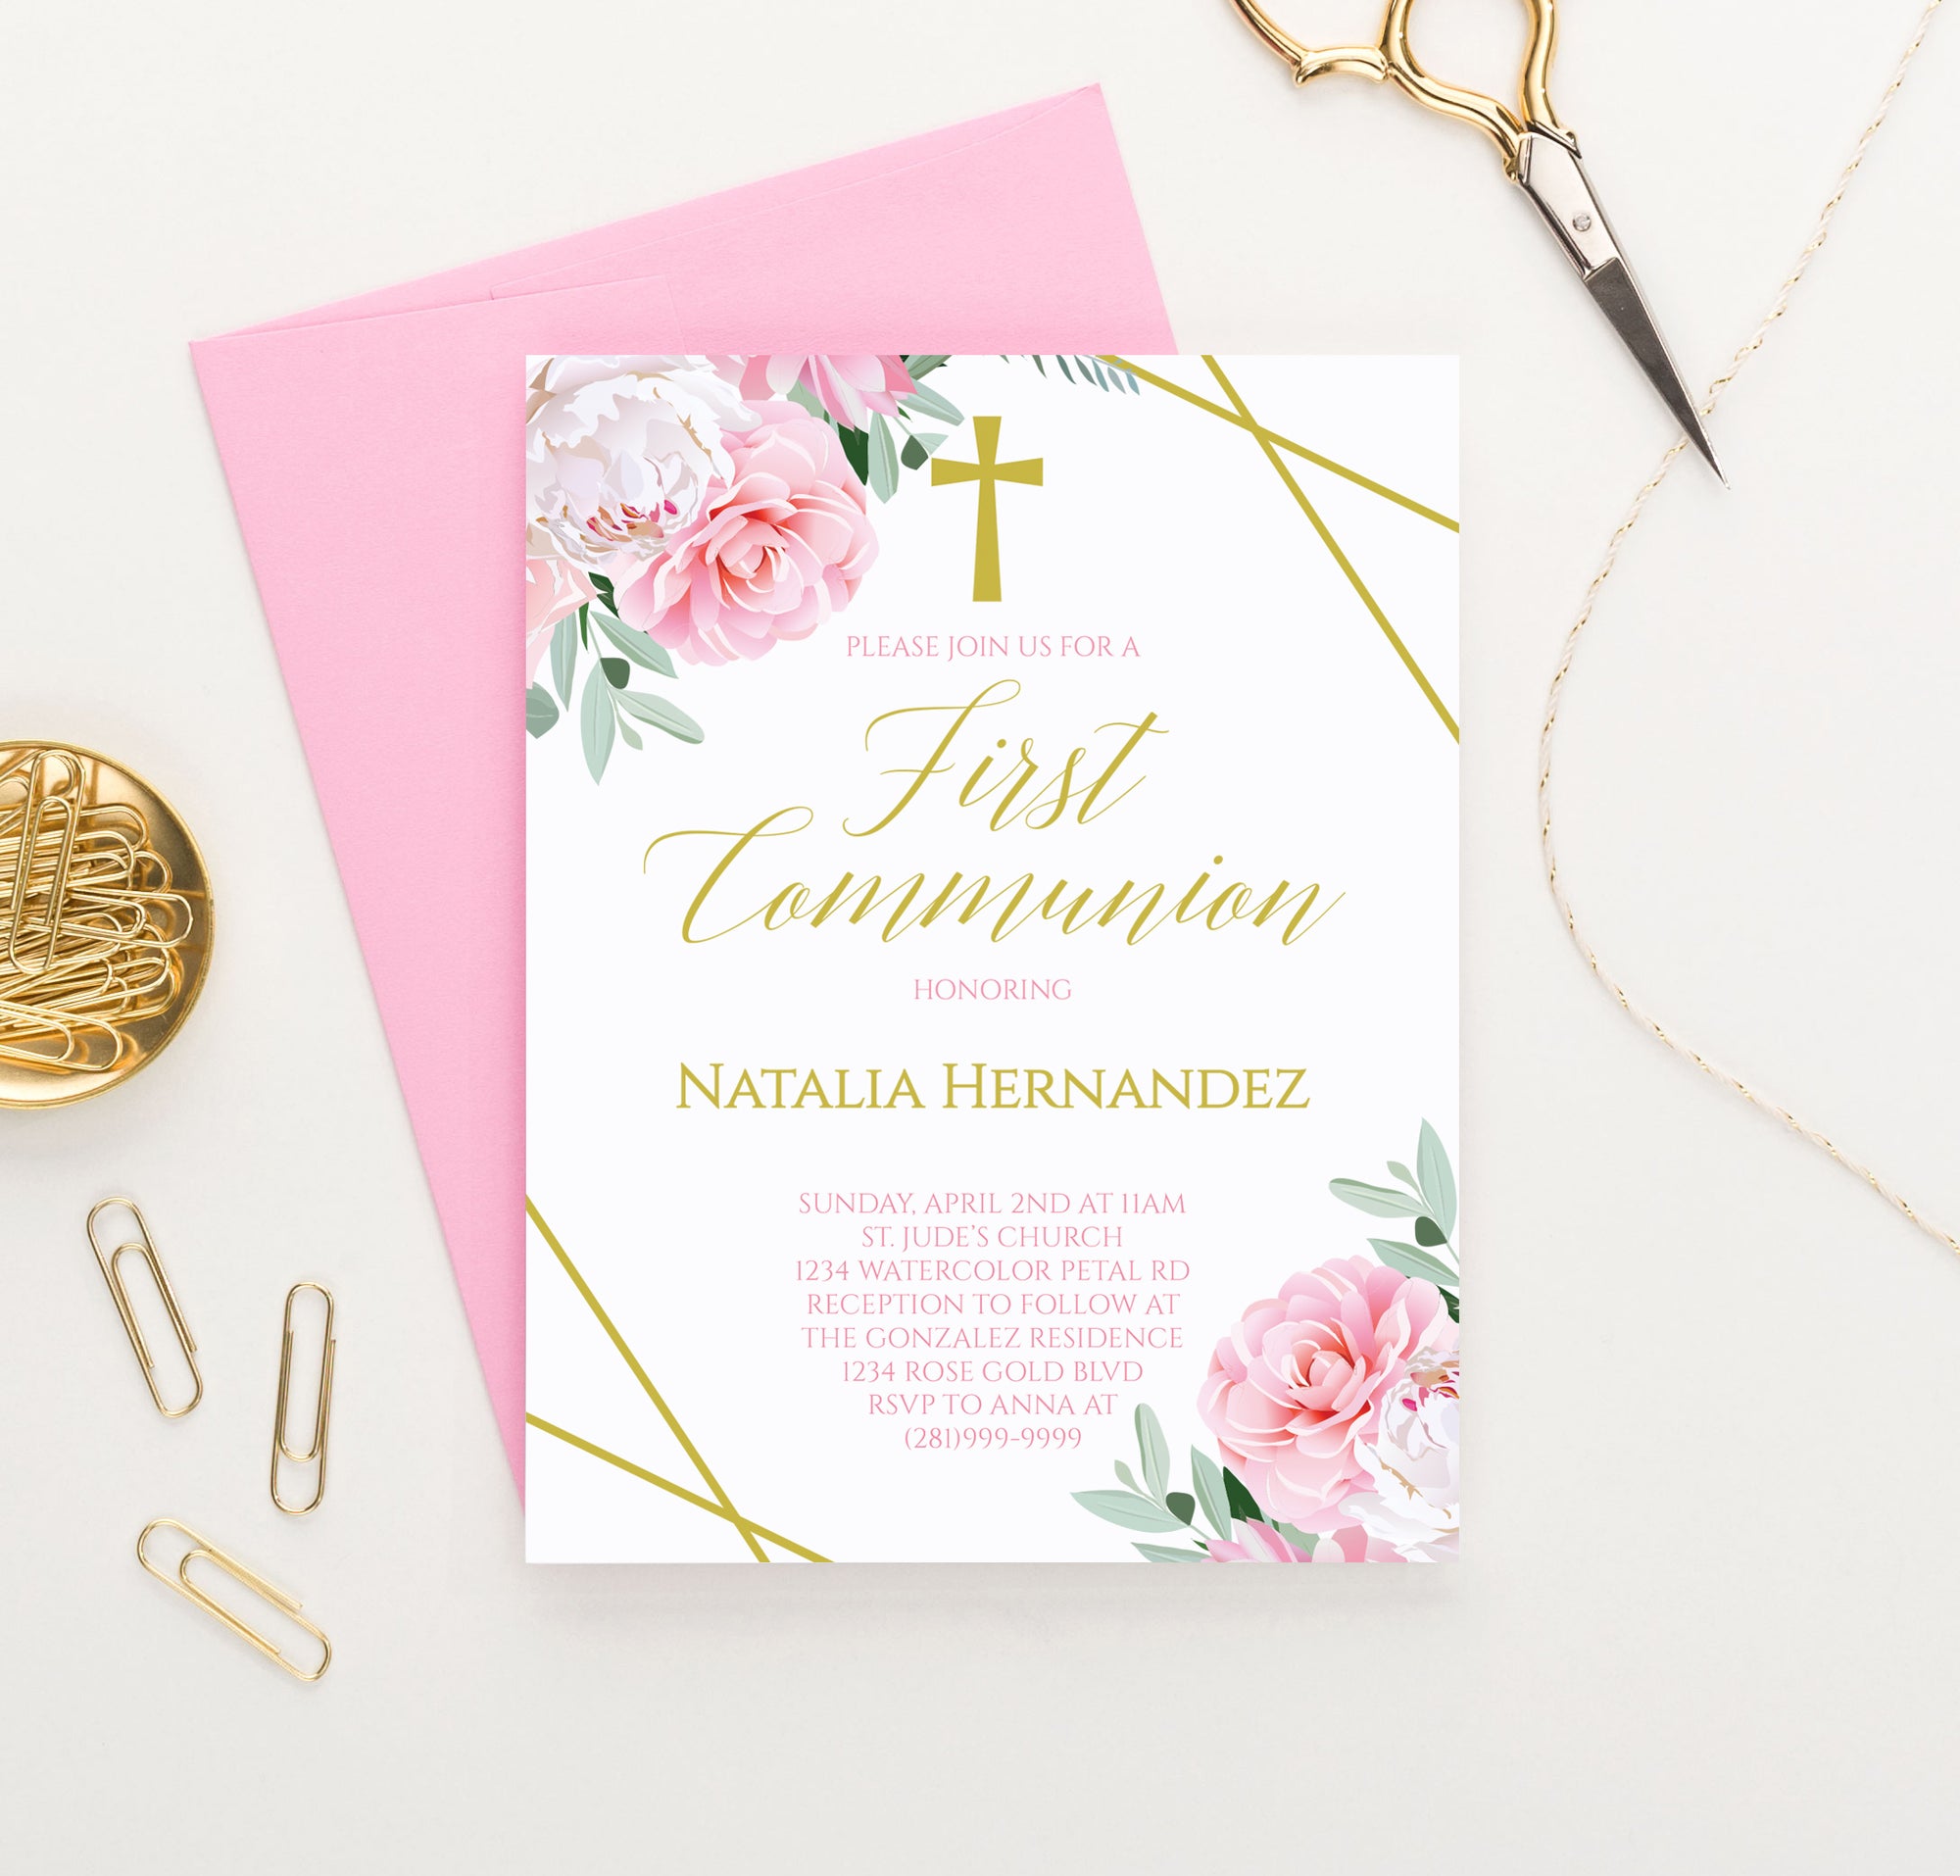 Personalized Pink And Gold Communion Invitations With Floral Corners